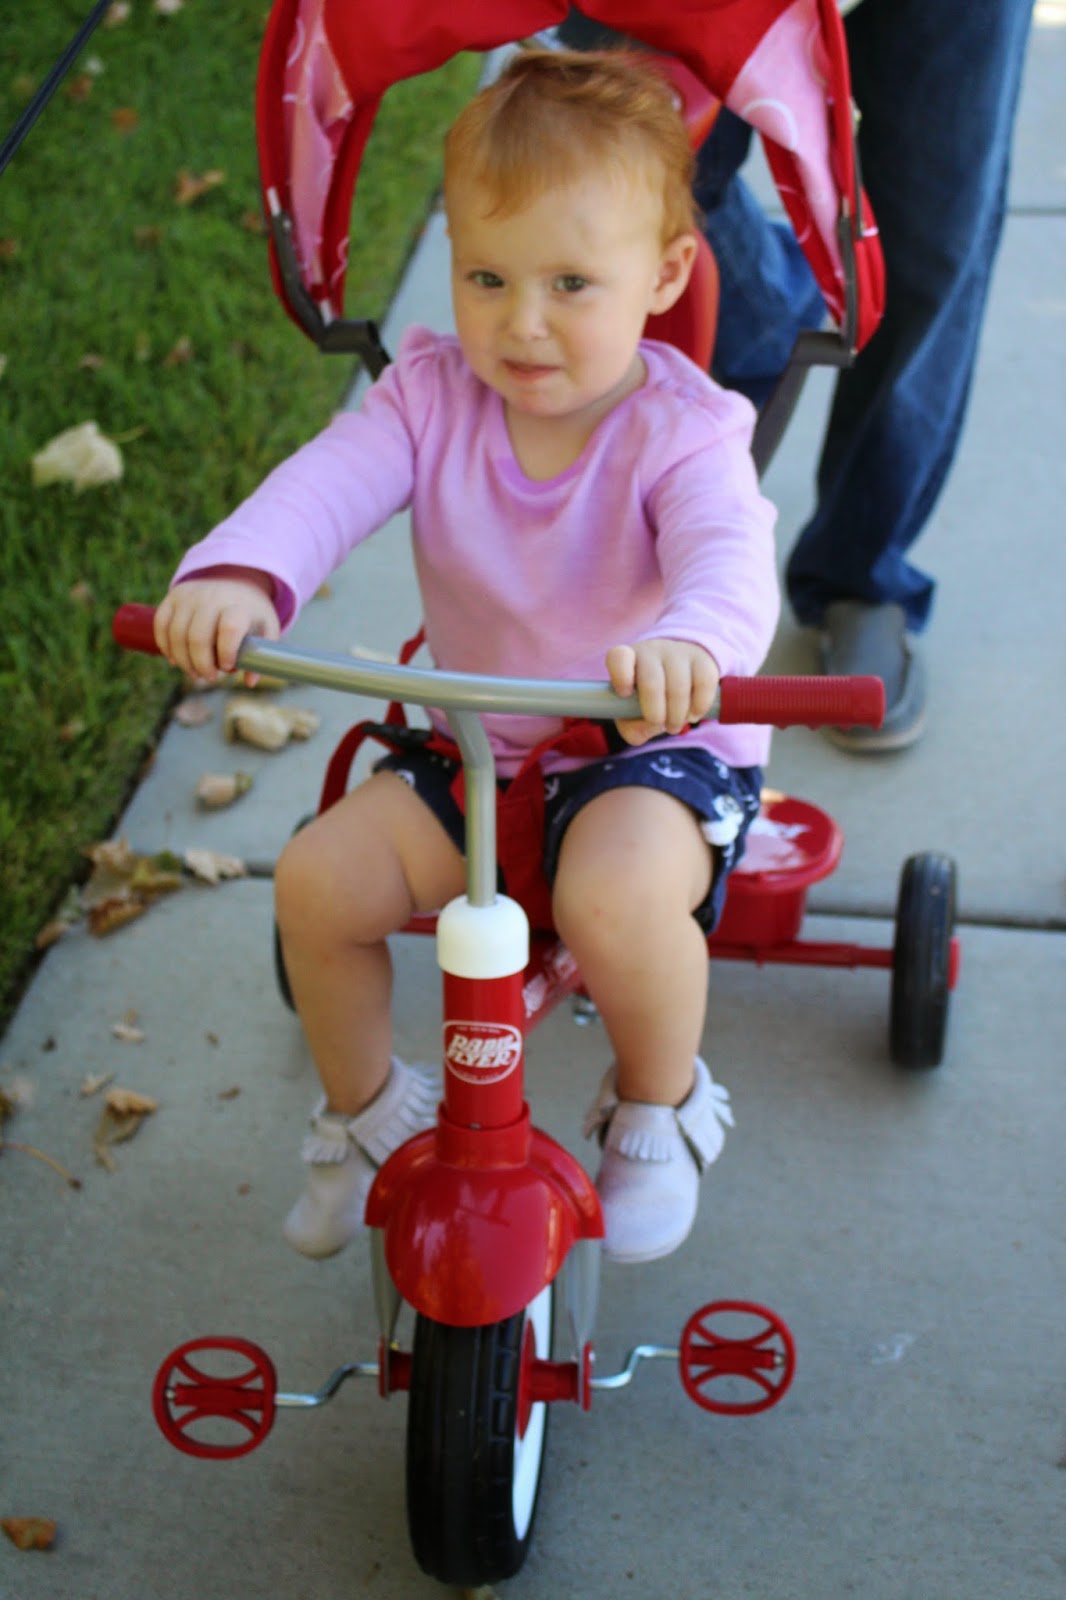 Boycotting Winter With the Radio Flyer Tricycle